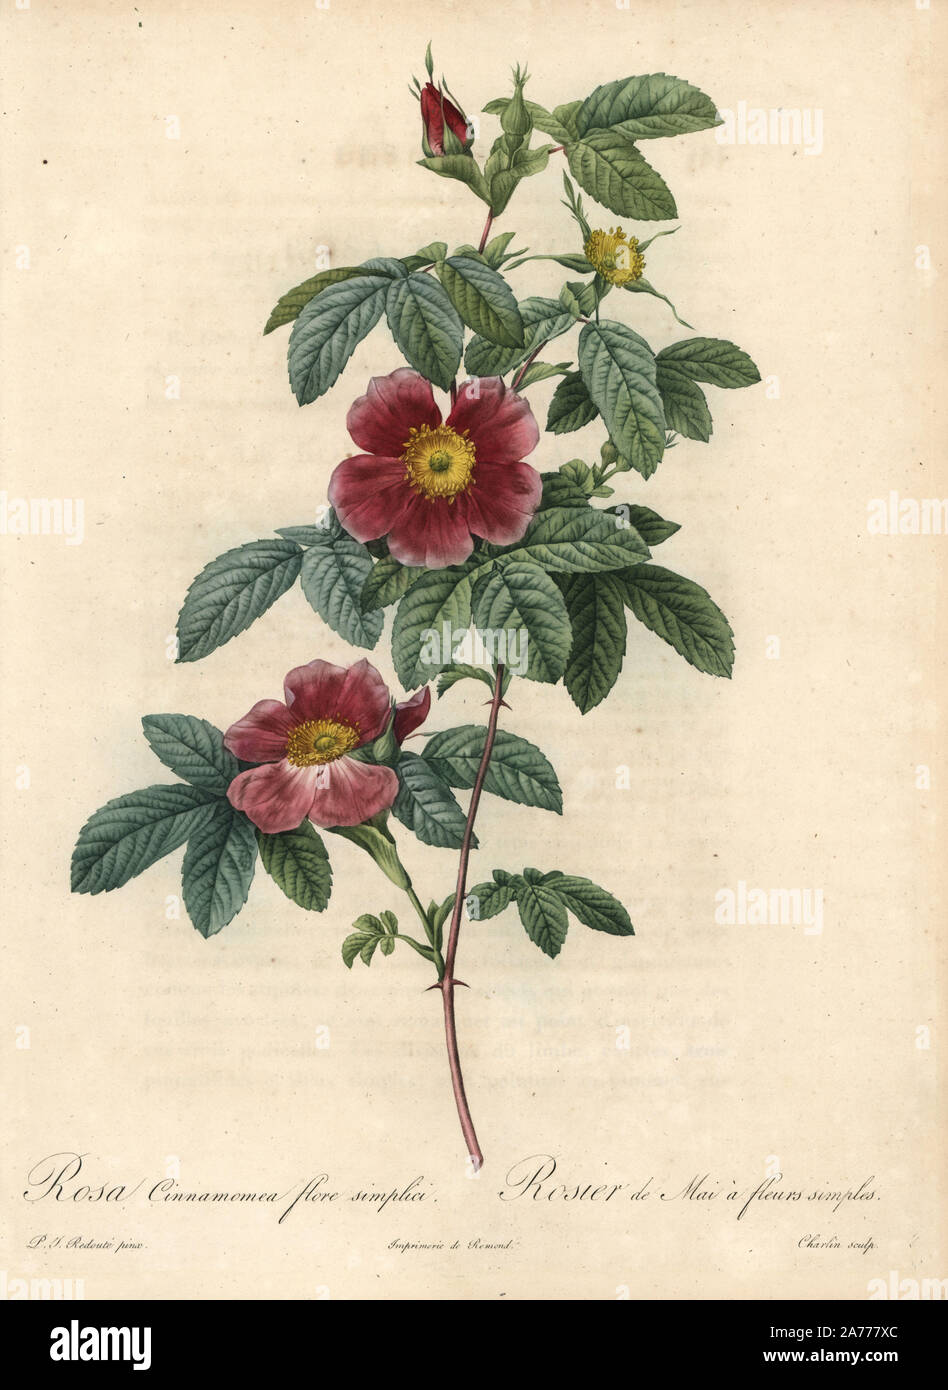 Single May rose, Rosa majalis (Rosa cinnamomea flore simplici). Handcoloured stipple copperplate engraving by Charlin after an illustration by Pierre-Joseph Redoute from 'Les Roses,' Firmin Didot, Paris, 1817. Stock Photo